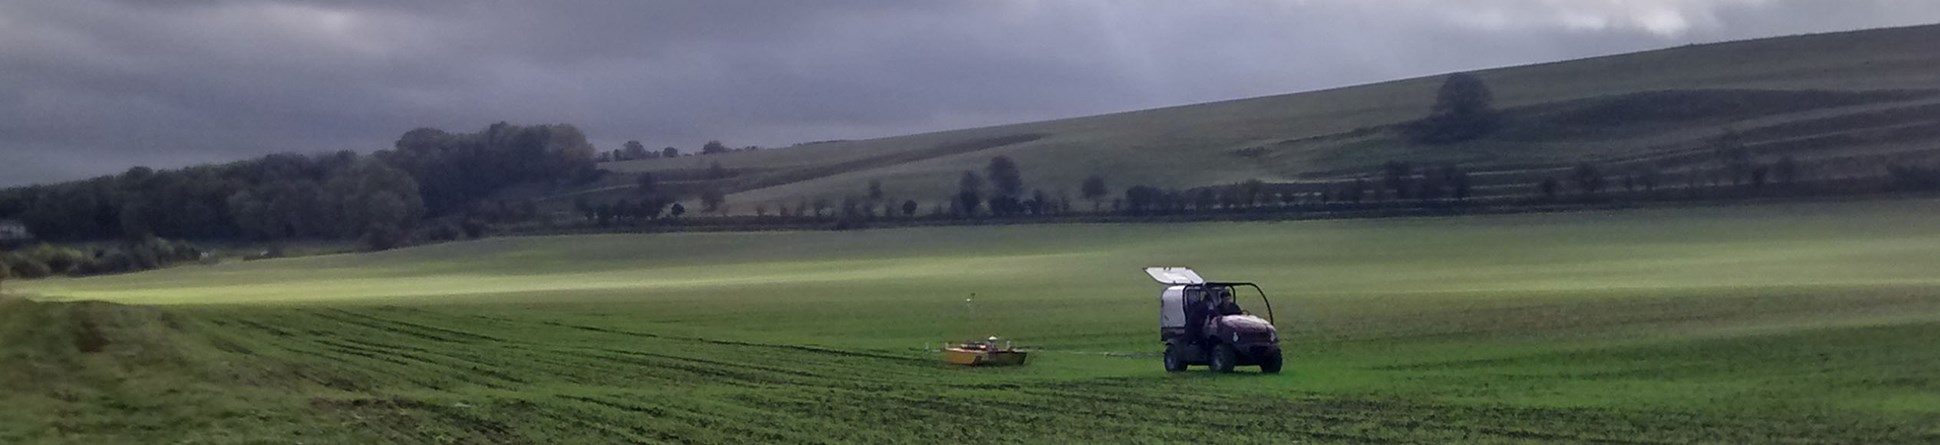 Colour photograph of buggy pulling a "sledge" across a field with germinating crop under a threatening sky heavy with clouds